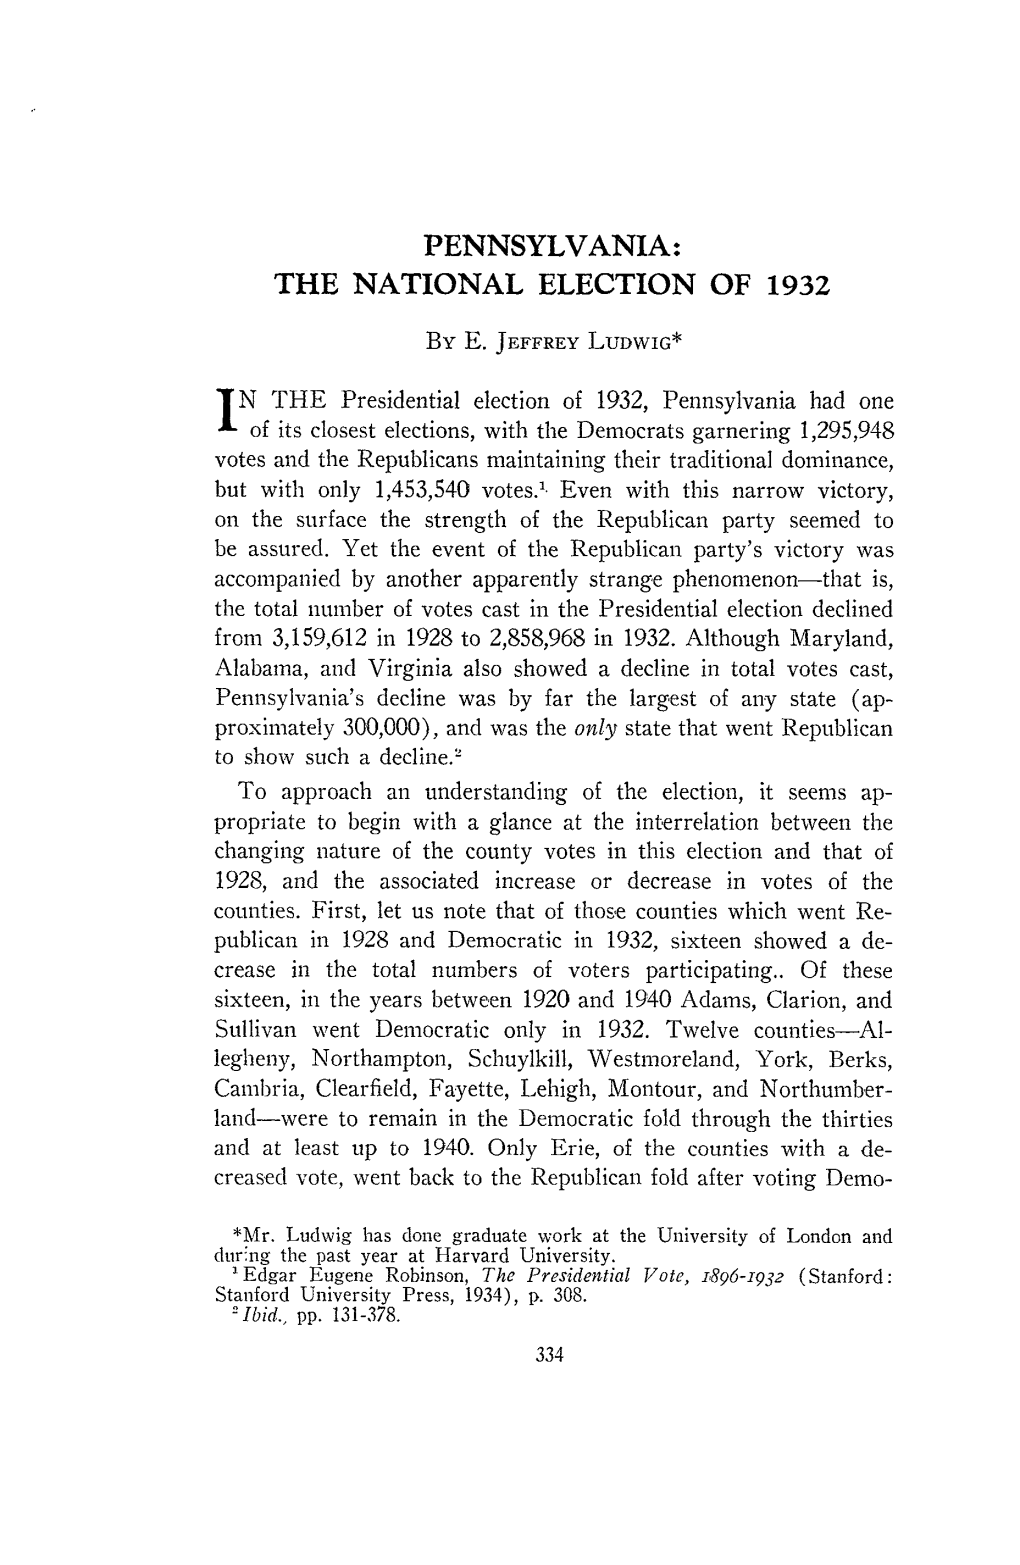 Pennsylvania: the National Election of 1932